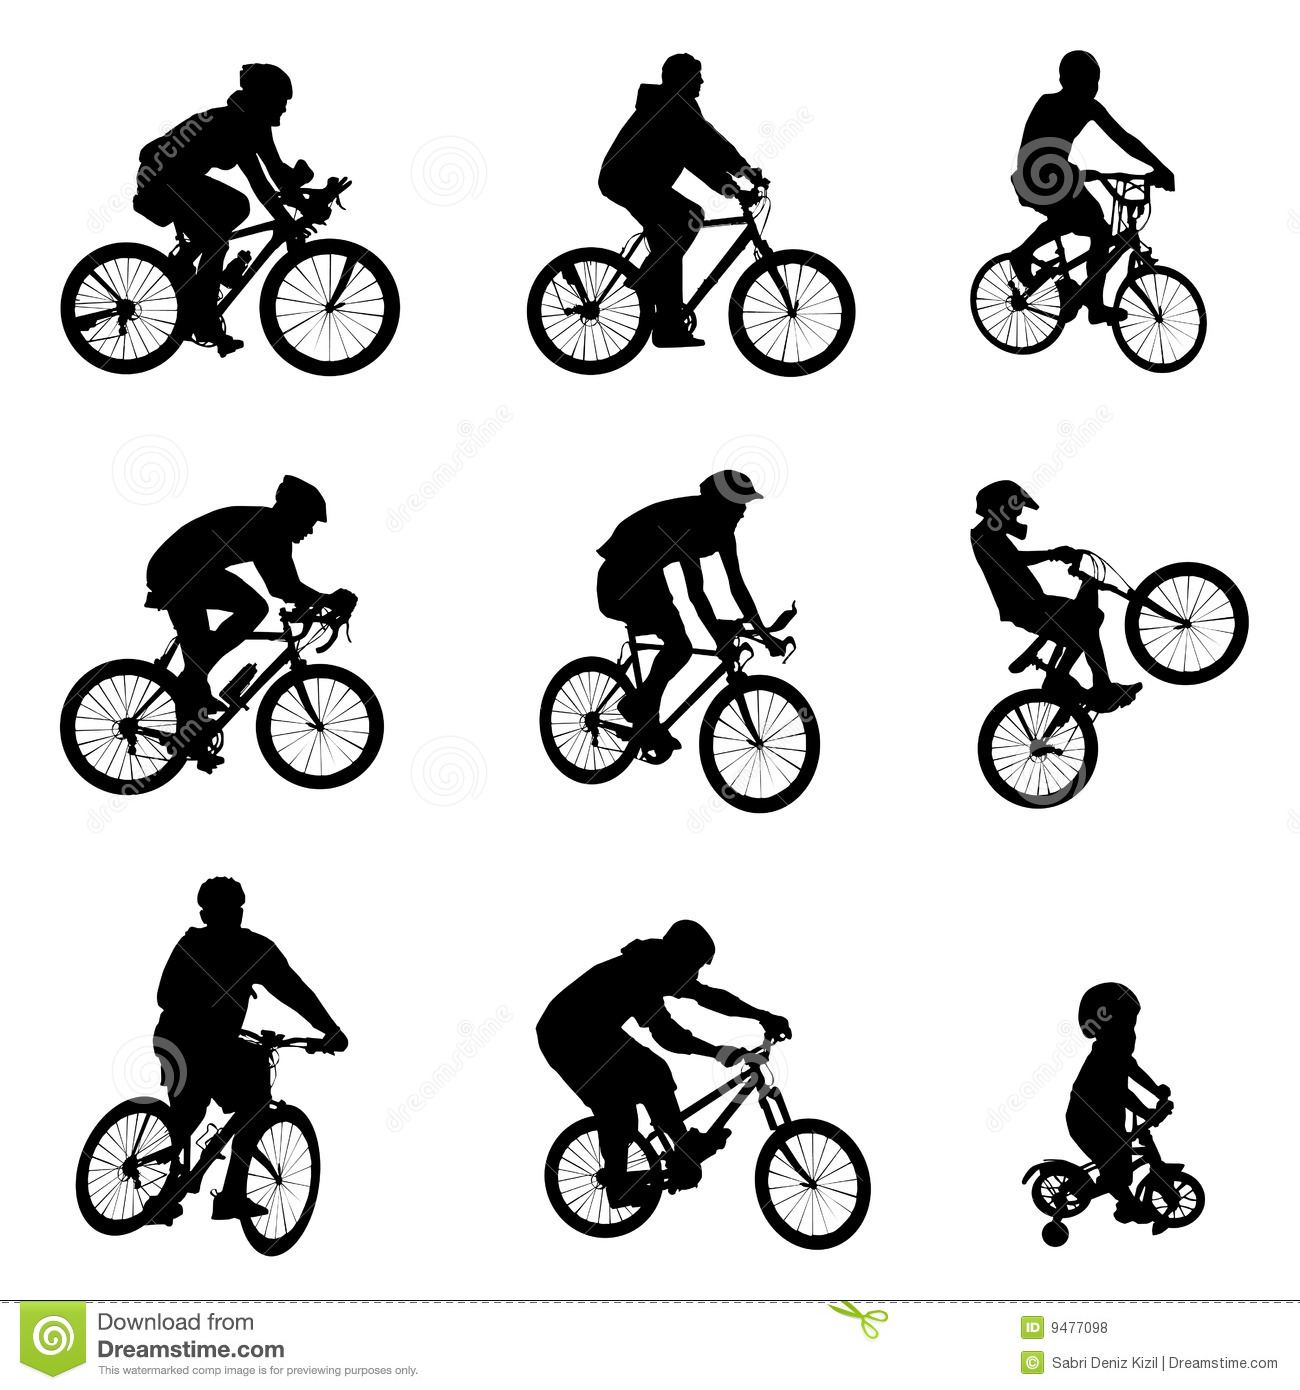 Bicycle Free Vector Silhouettes